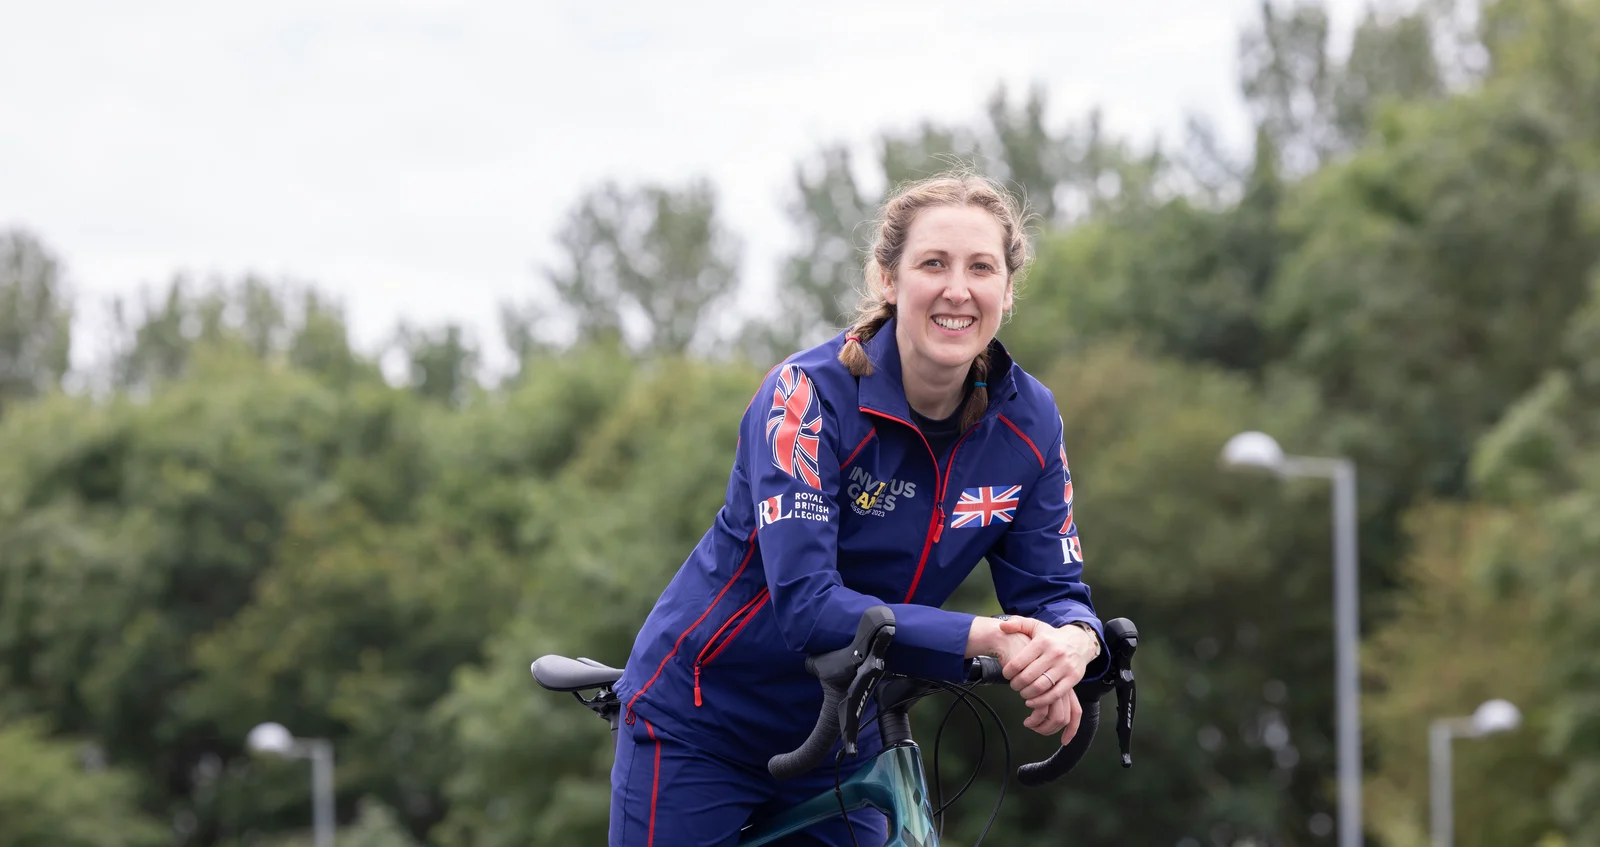 Becky leaning on her bike, smiling towards the camera. She is wearing a blue Invictus Games Team UK tracksuit and is smiling at the camera. Behind her we can see a background of trees.